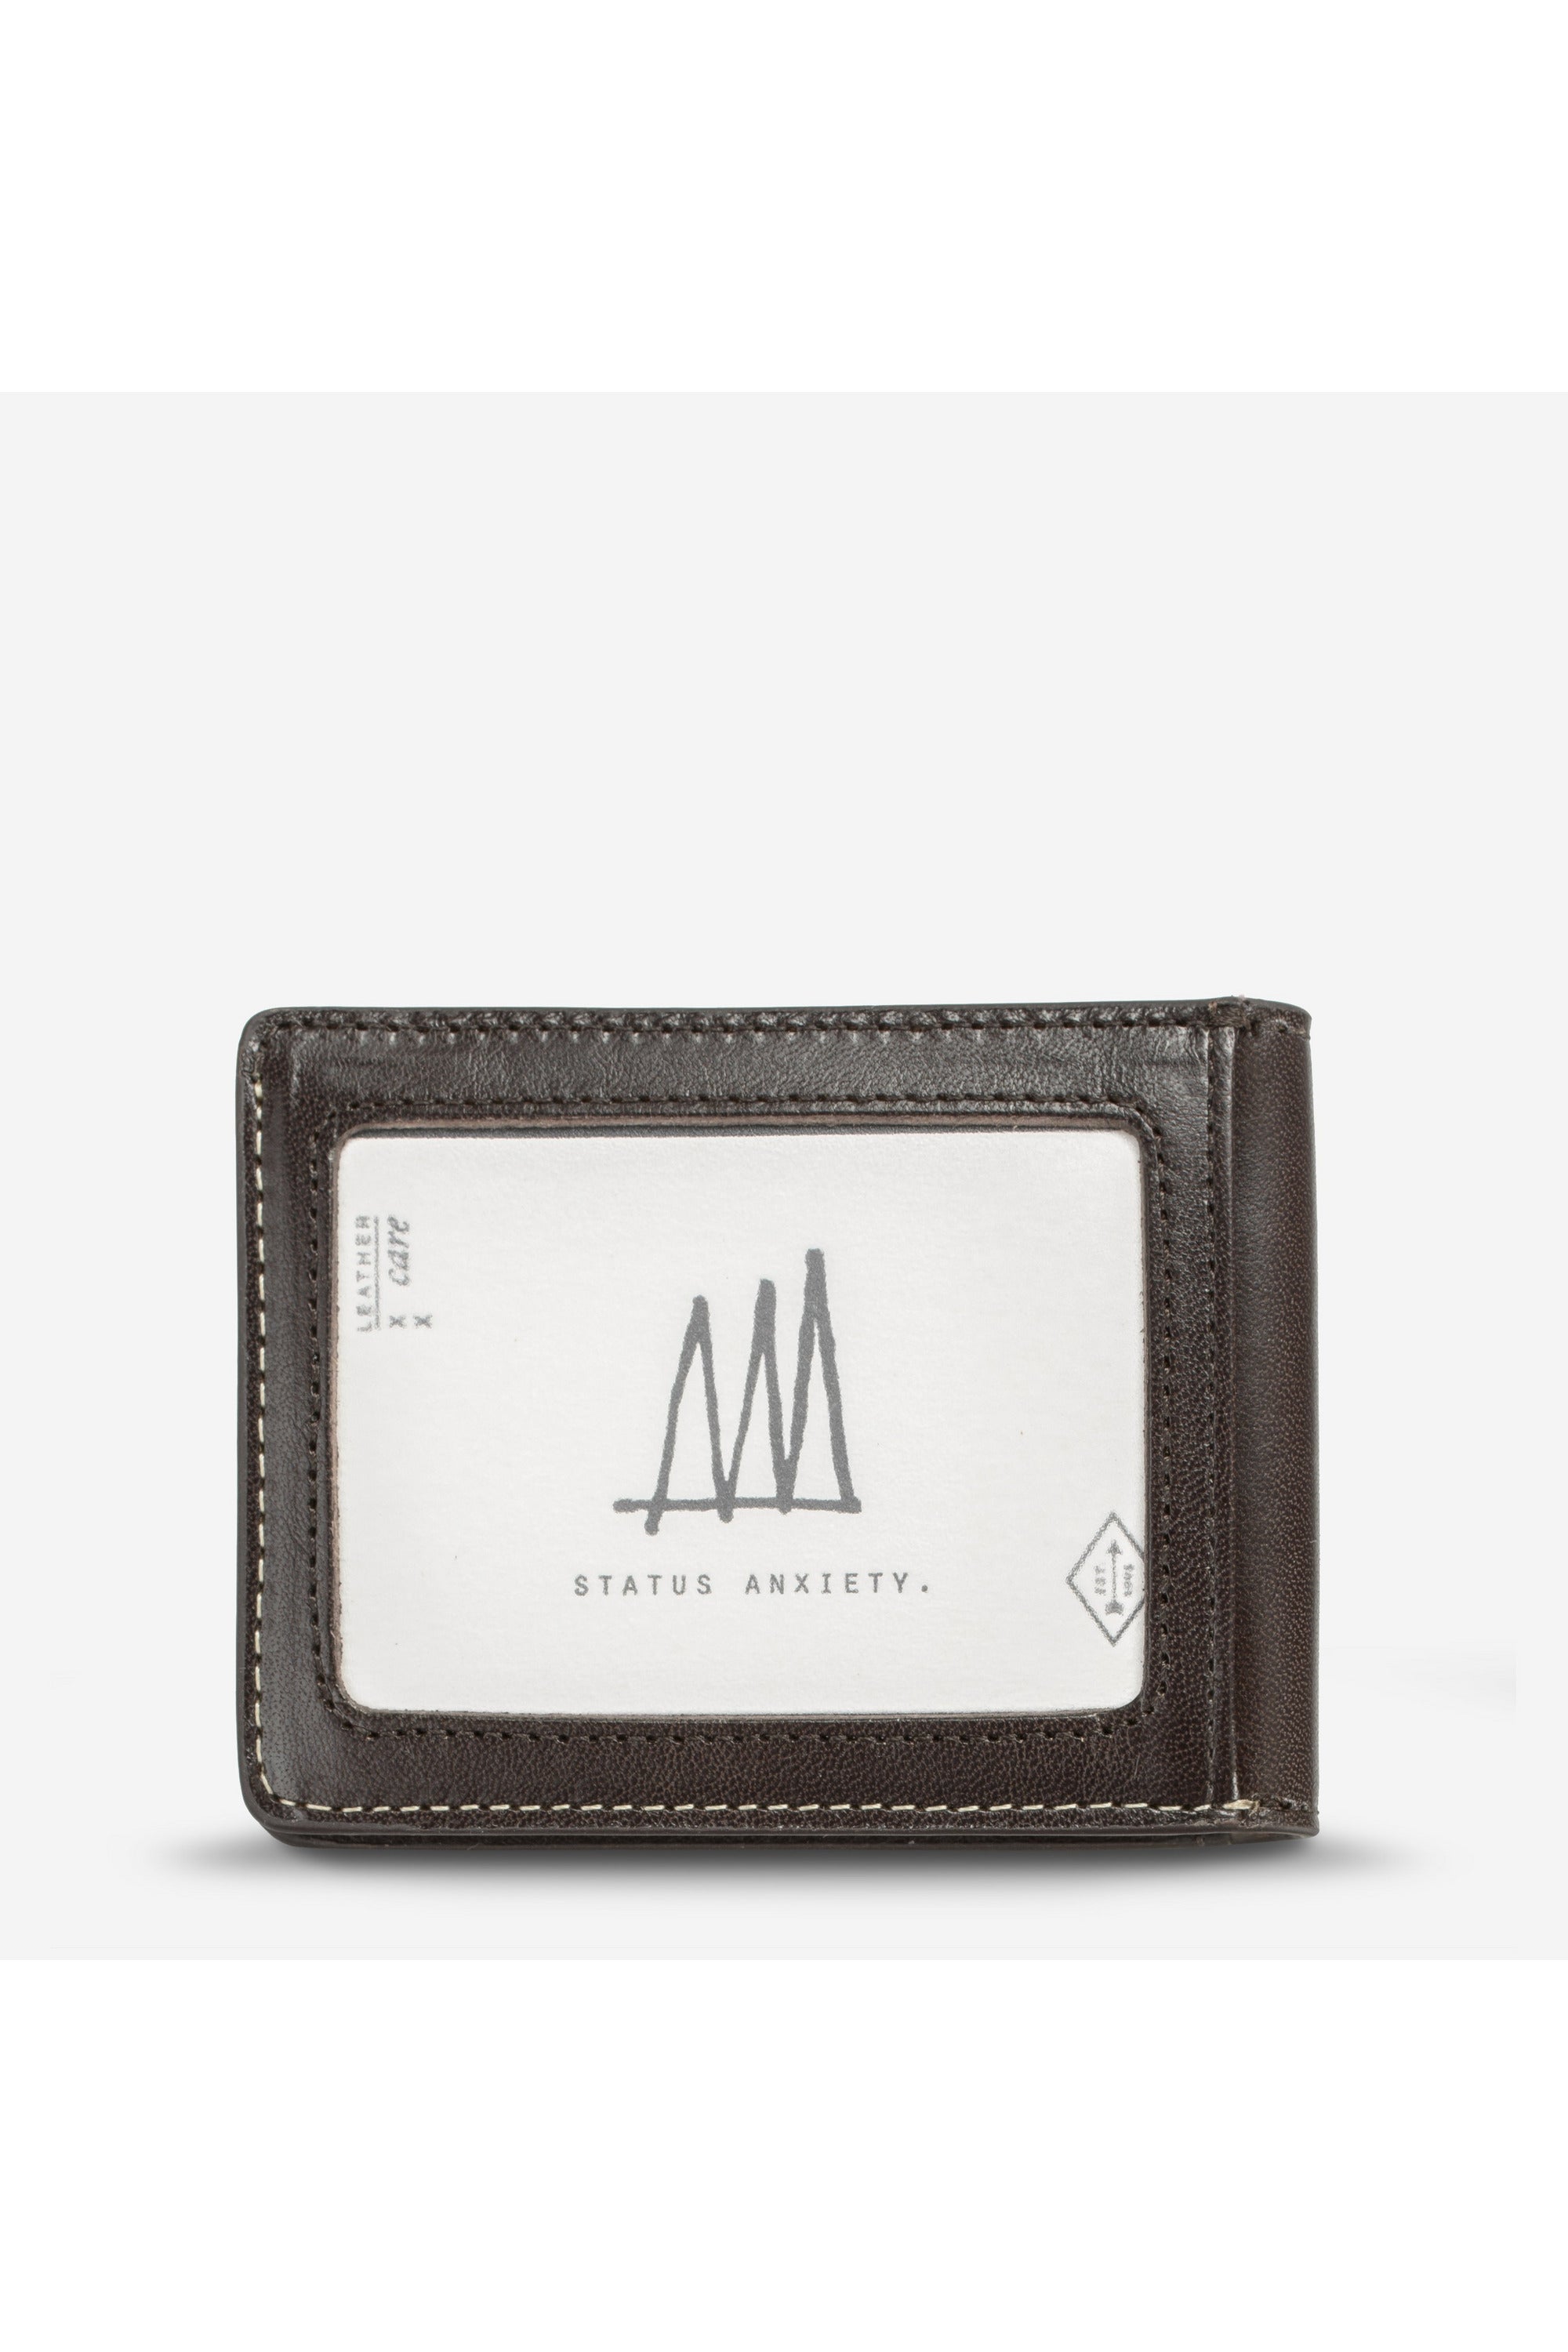 Status Anxiety - Ethan Wallet - Chocolate